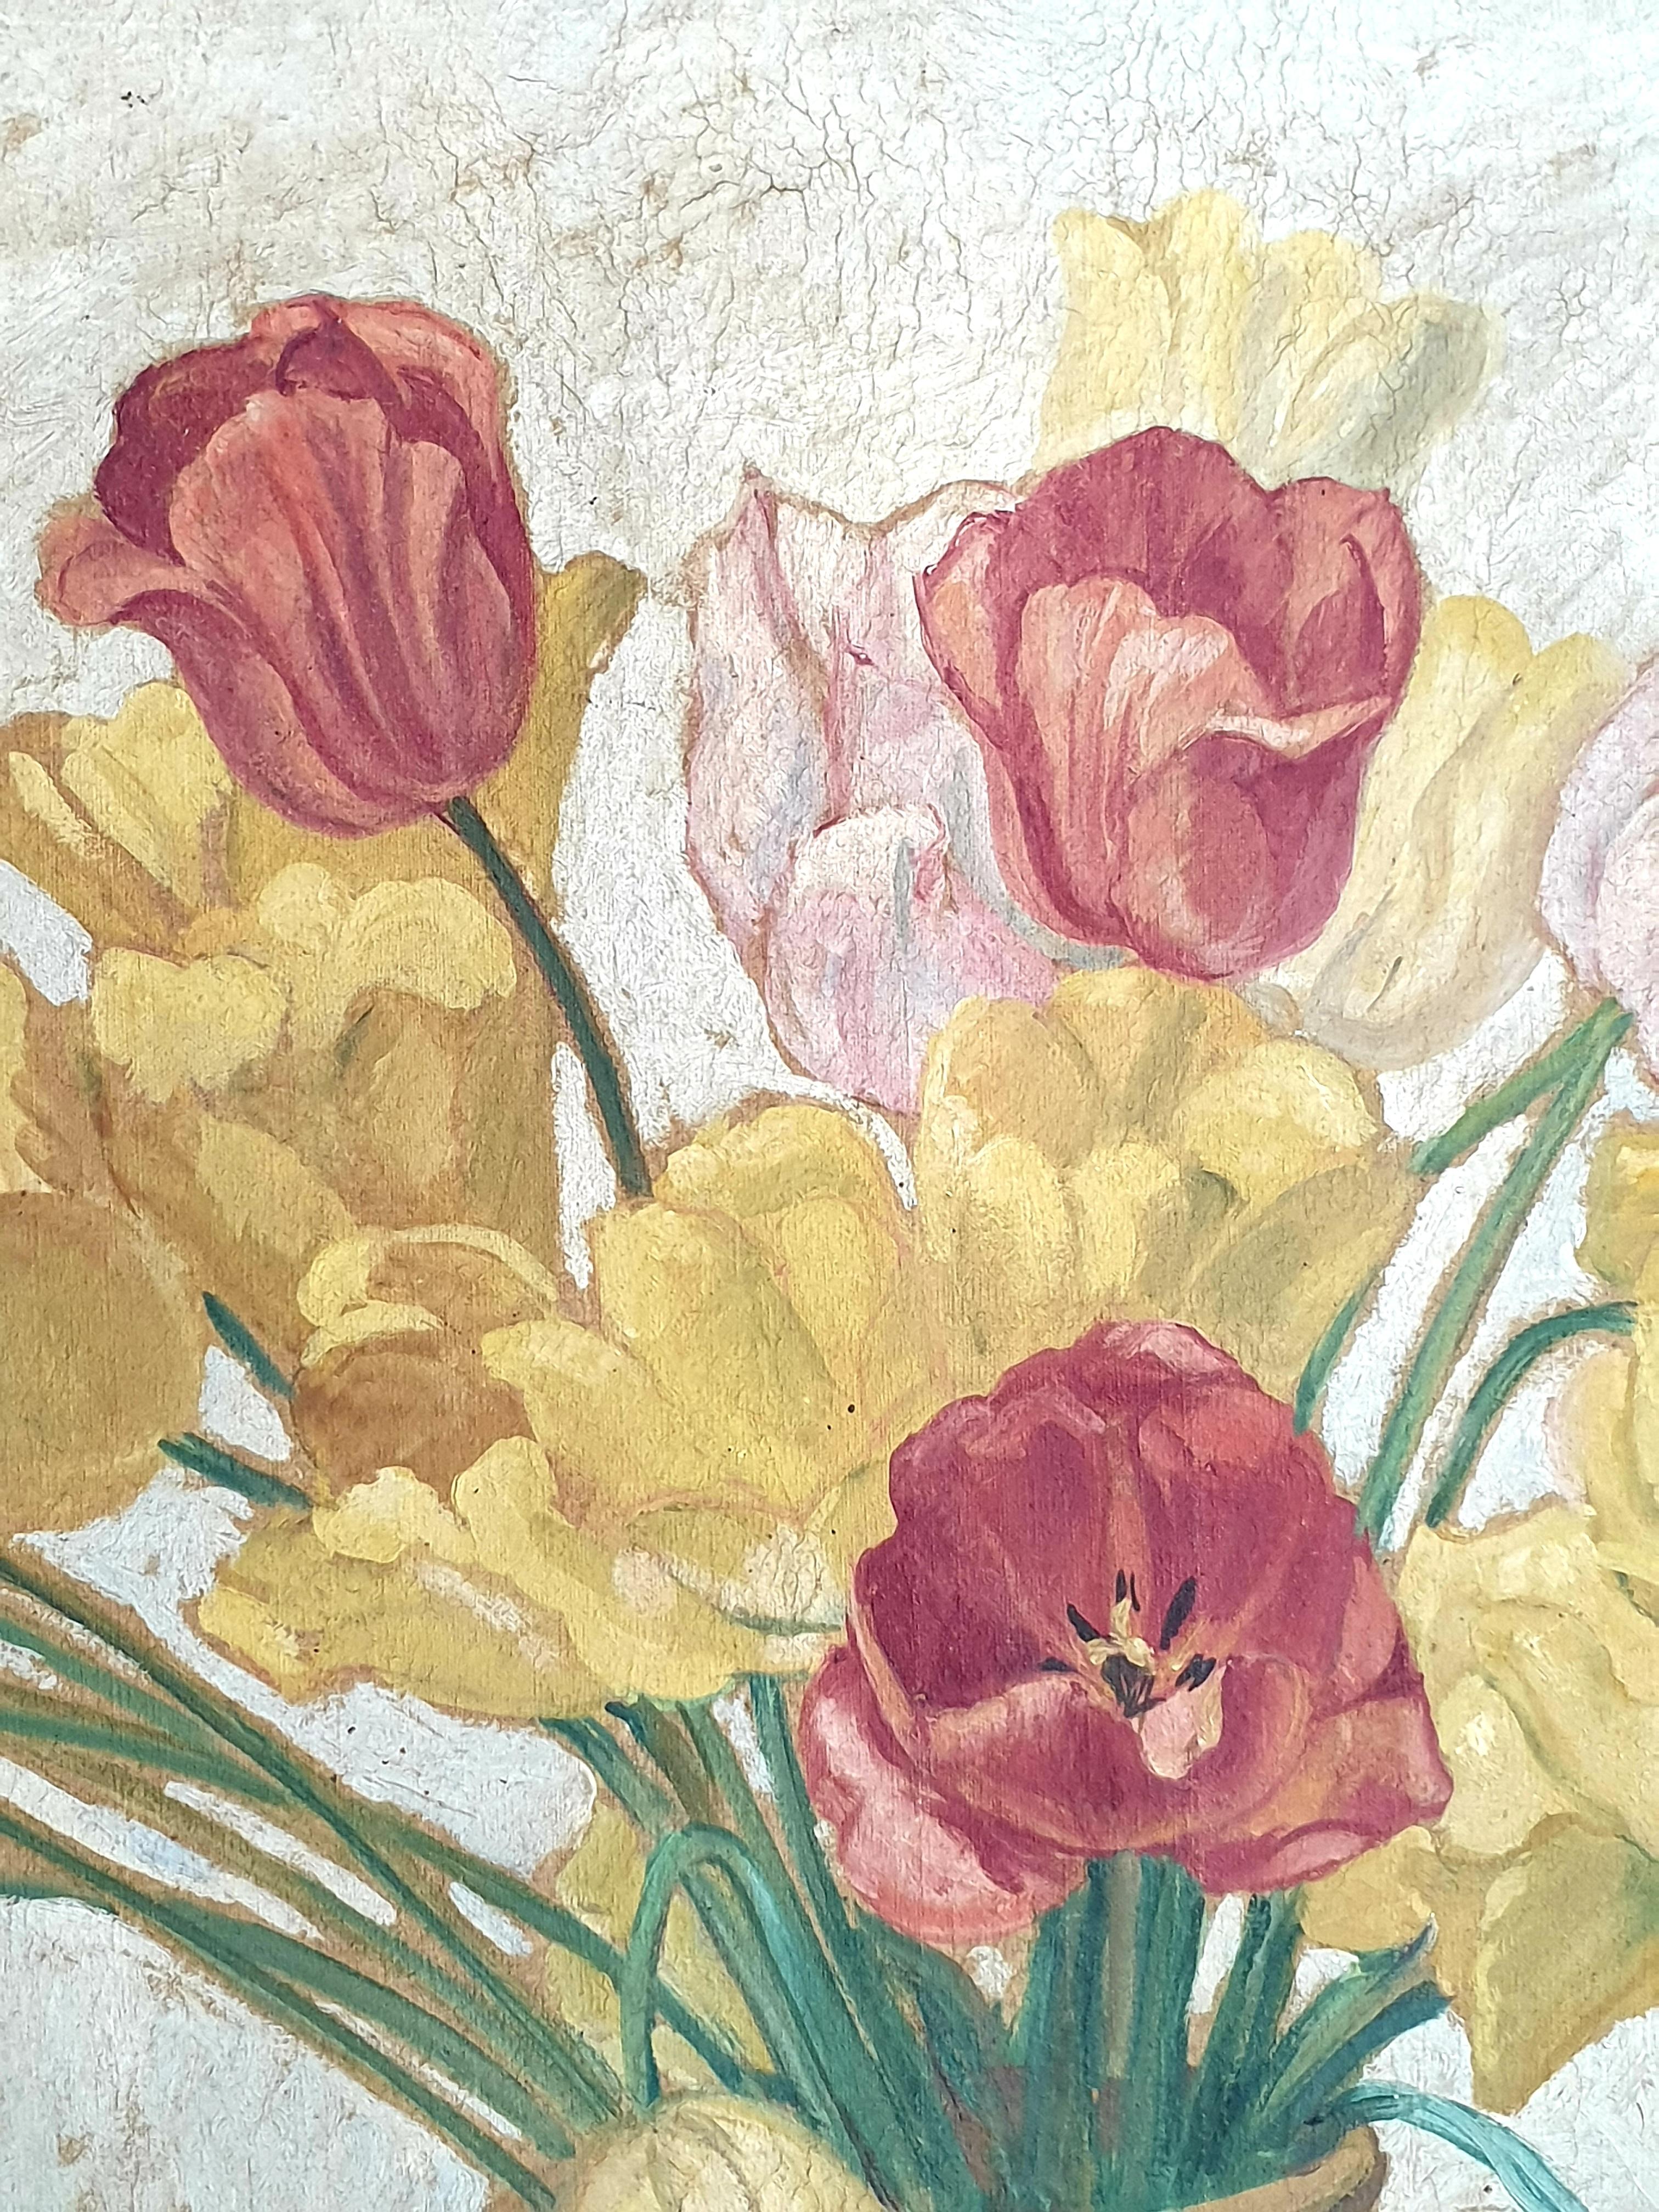 Large Early 20th Century Oil on Canvas of Tulips Displayed in a Confit Jar. For Sale 4